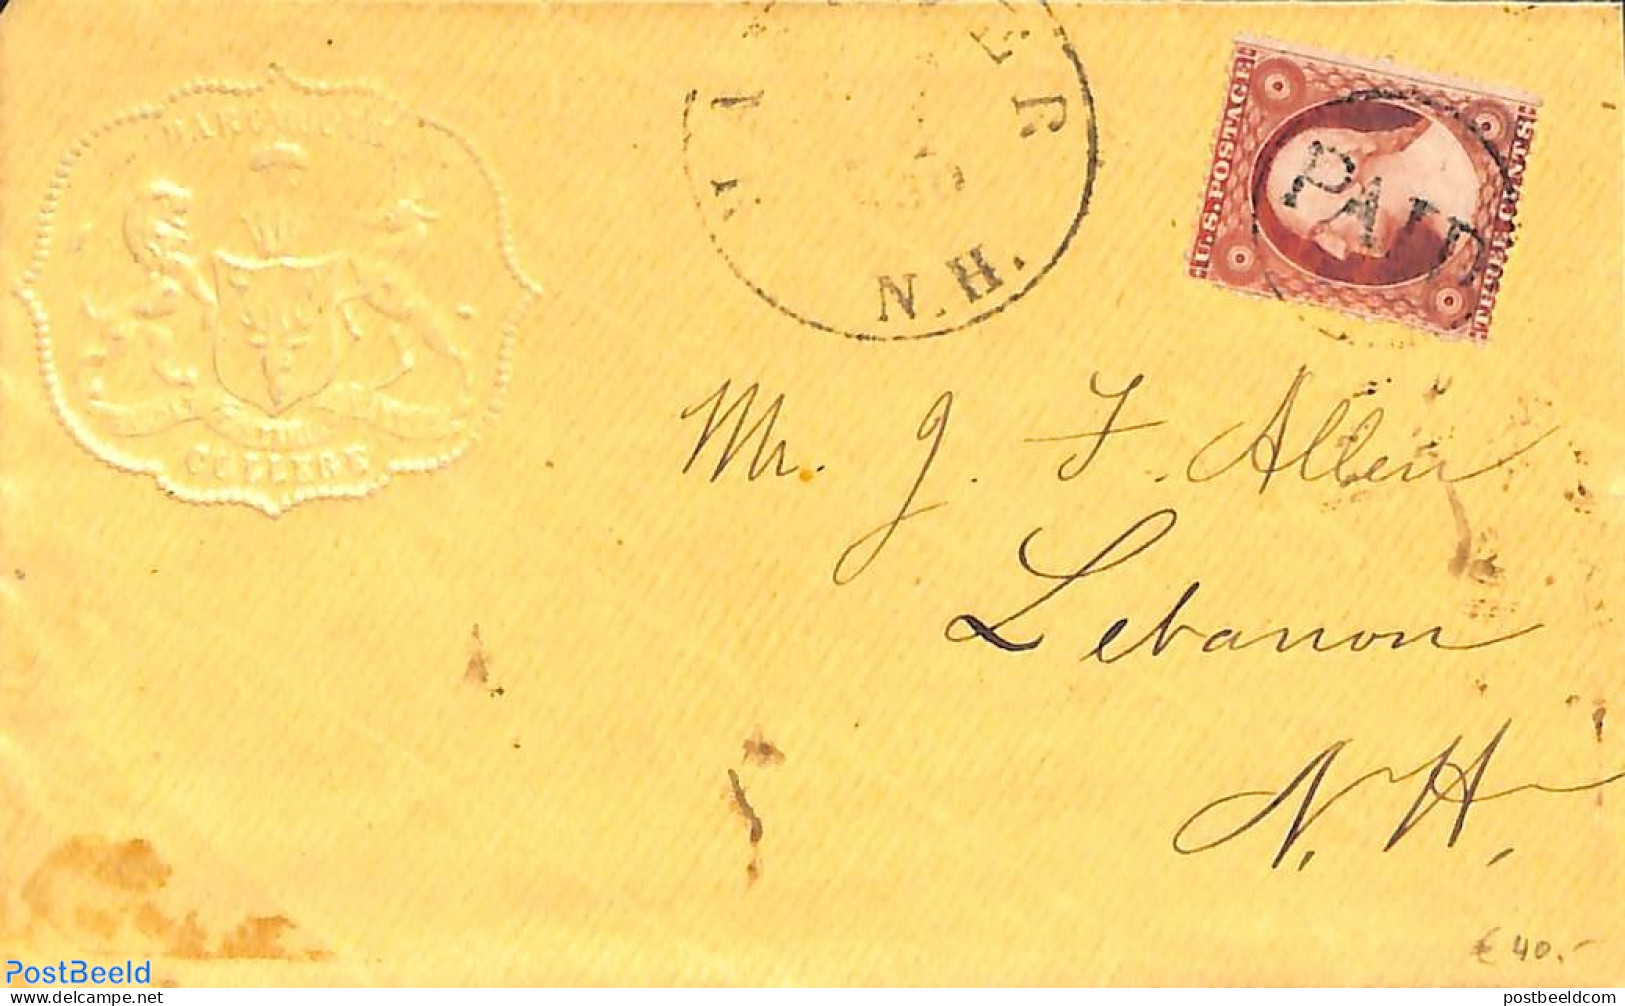 United States Of America 1860 Letter To Lebanon, Postal History - Covers & Documents